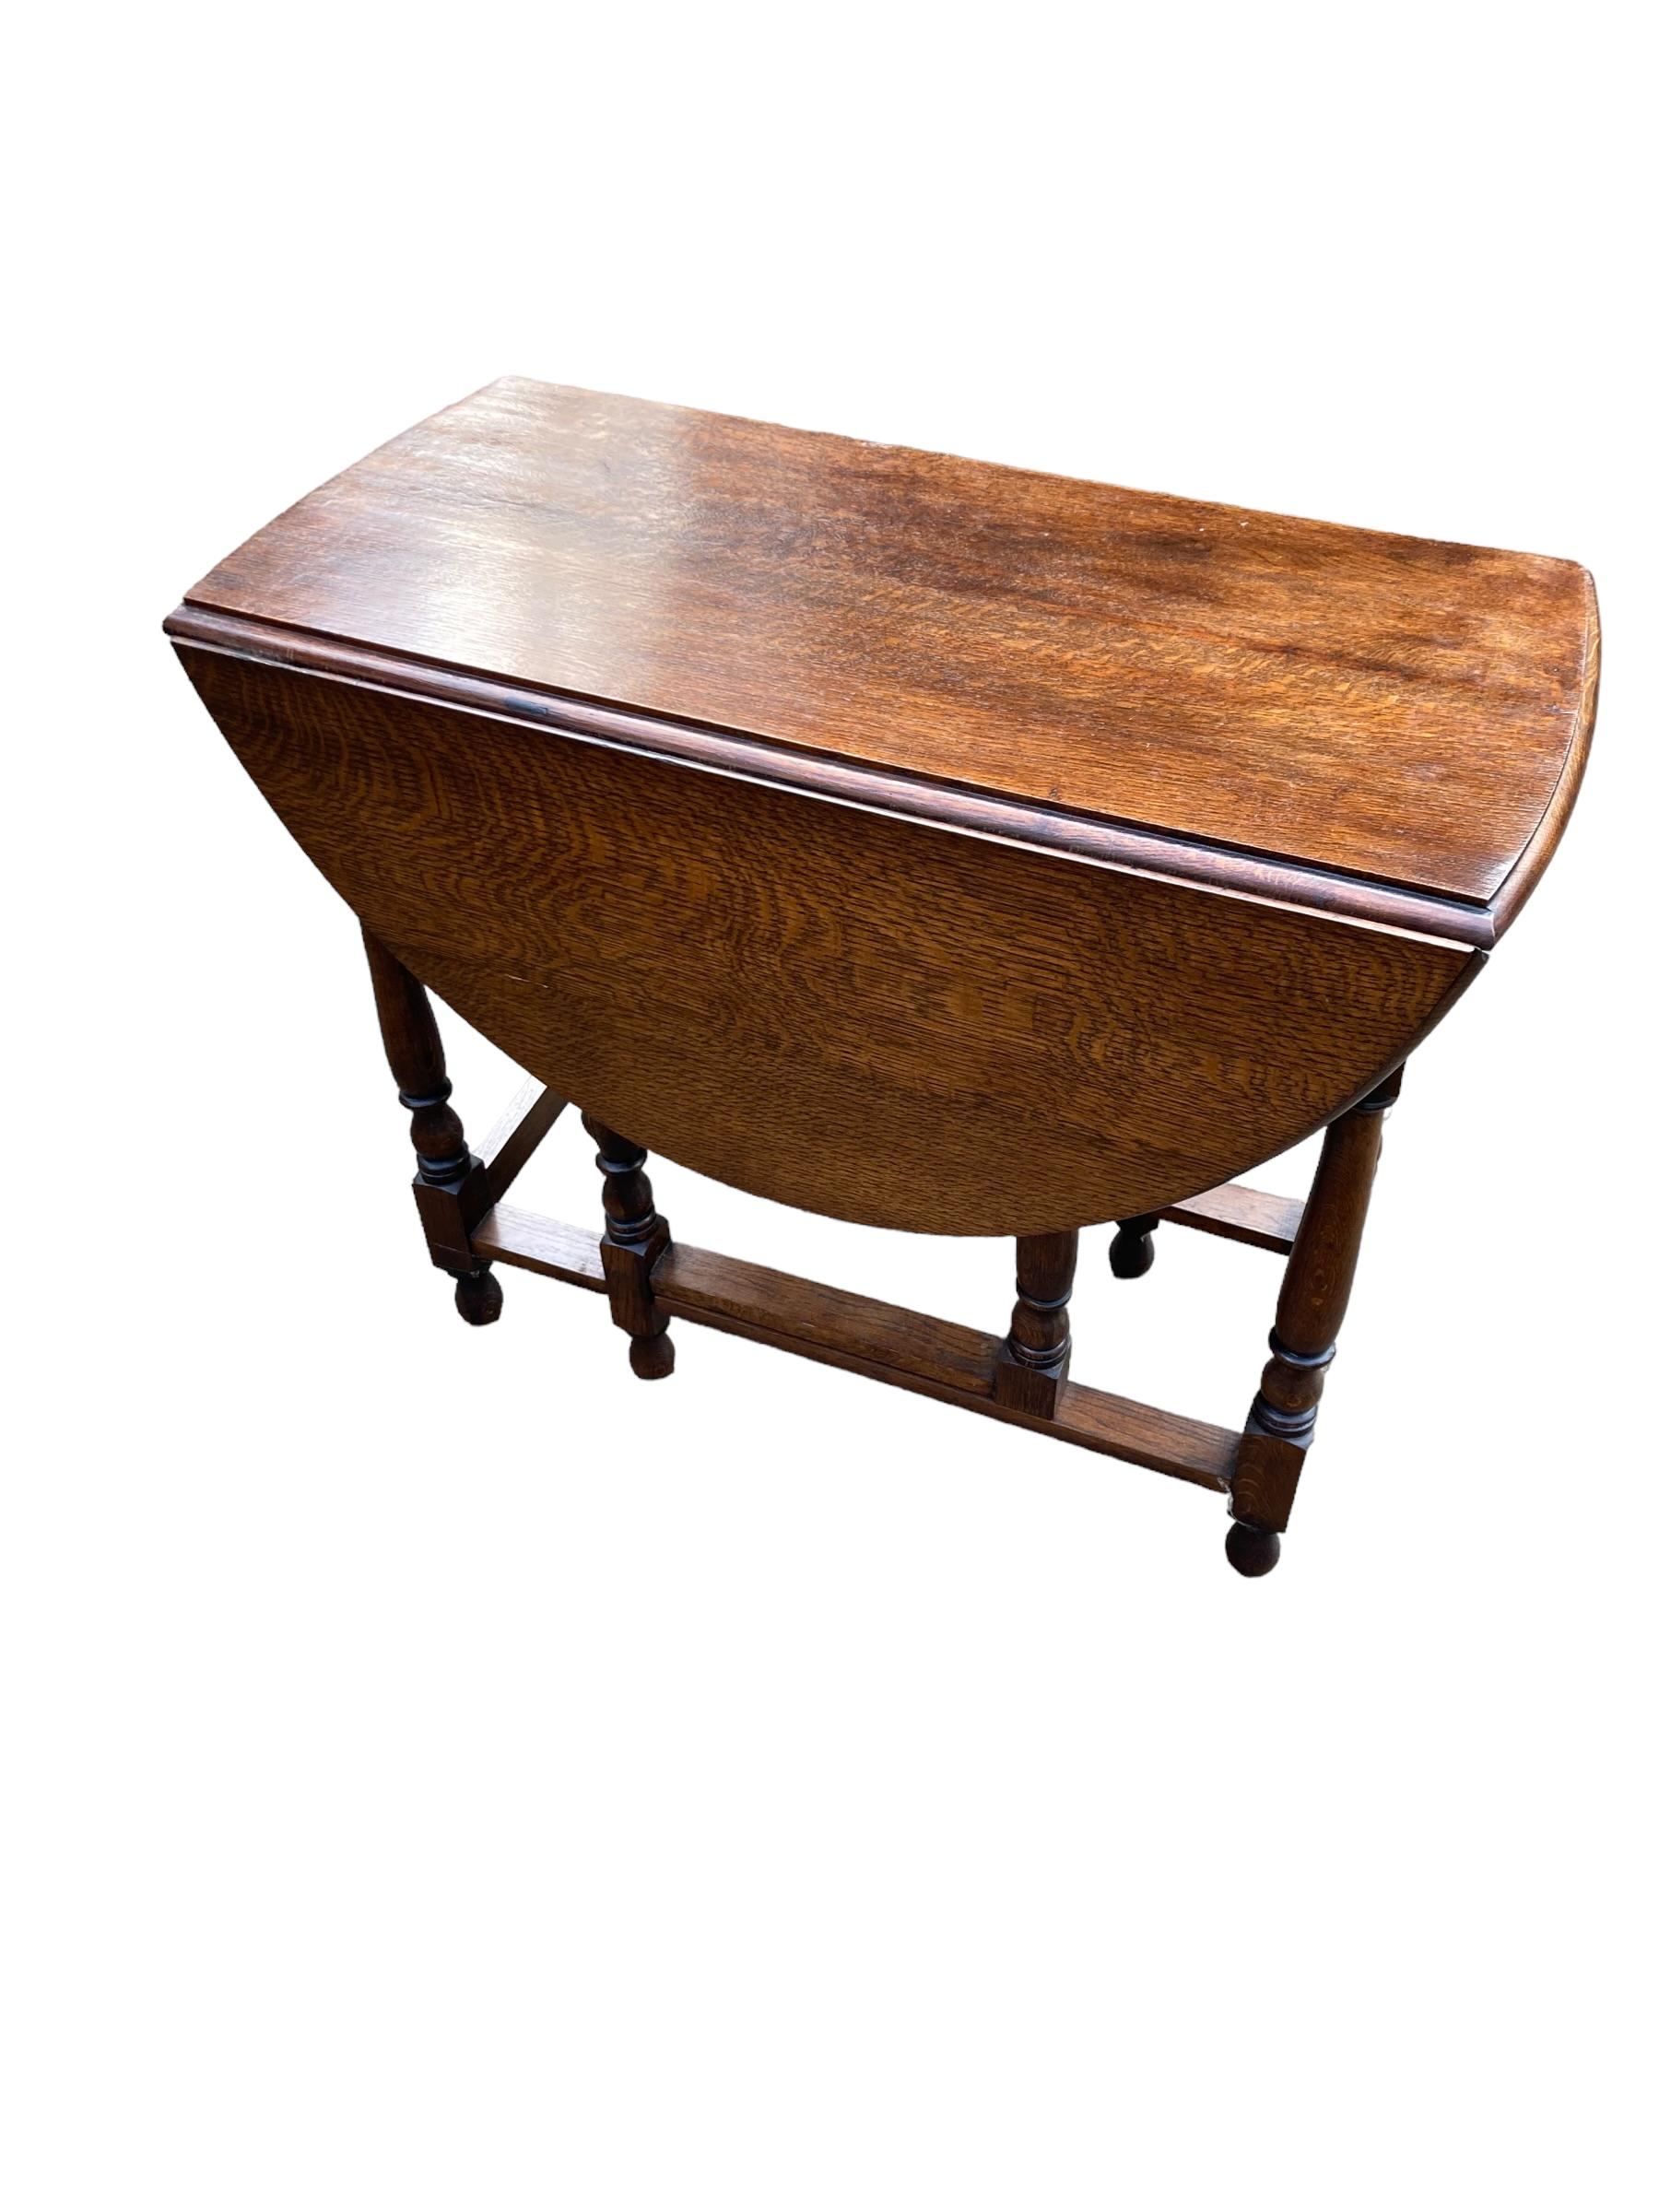 Oval shaped Oak Gate Leg table, has 3 sizes for practicality and easy to store when folded taking up little space. A solid and well made period piece made circ 1960's. Lovely dark oak in colour.

H: 75 cm

W: 88 cm

L1: 38 cm

L2: 79 cm

L3: 120 cm